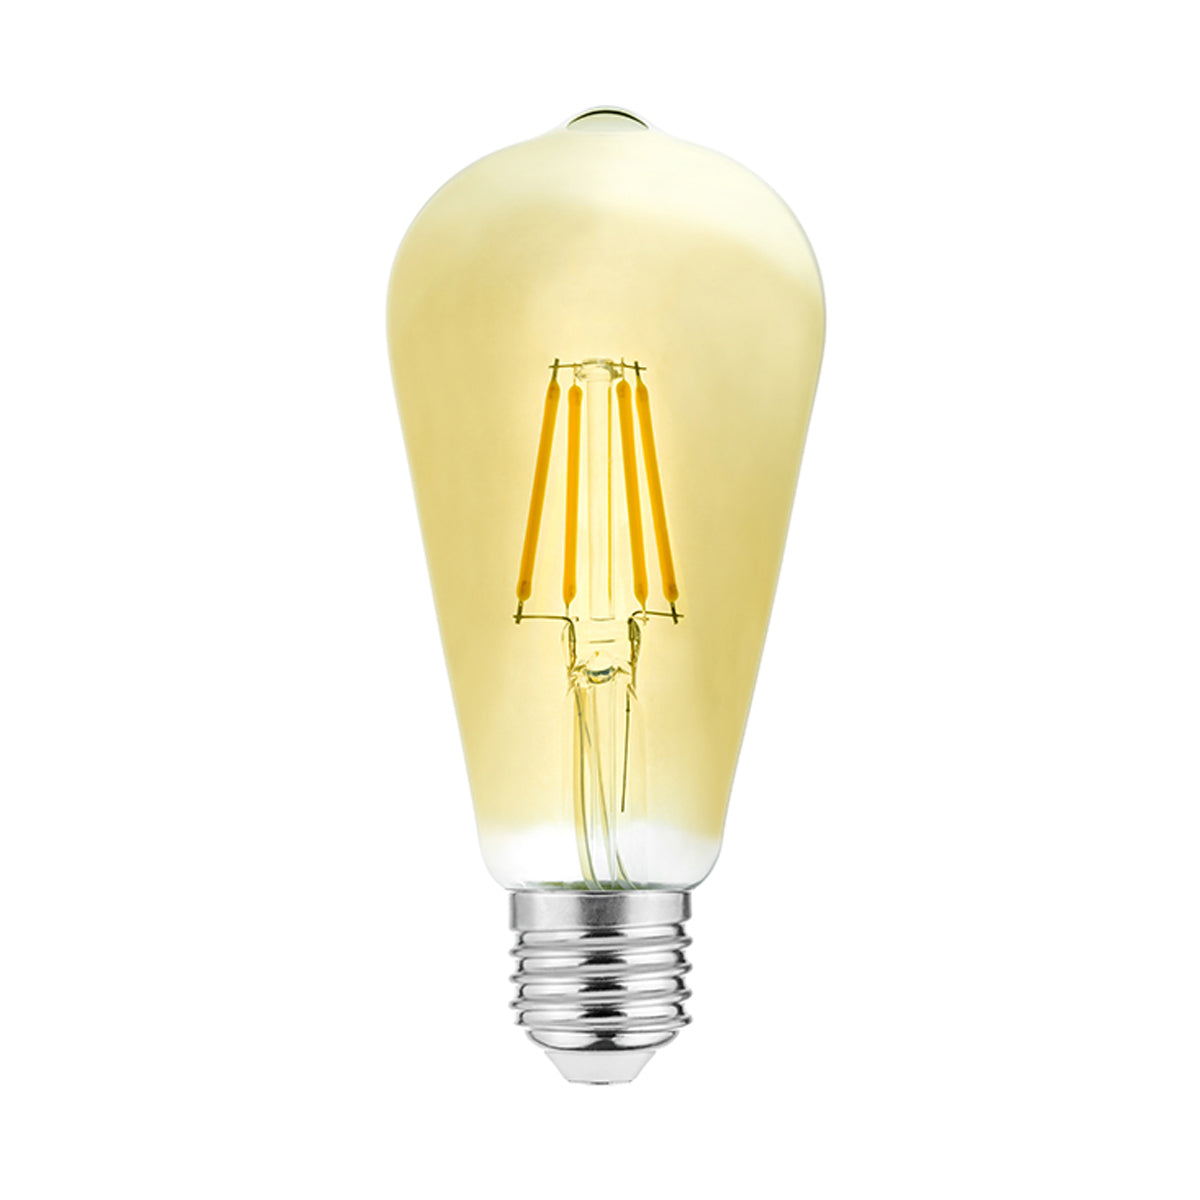 Our warm white LED bulbs have a visible filament for a distinctive look that will complement an array of home decors. Not only is it a decorative feature light bulb, but it also has low energy consumption, making it both practical and ideal for mood lighting.